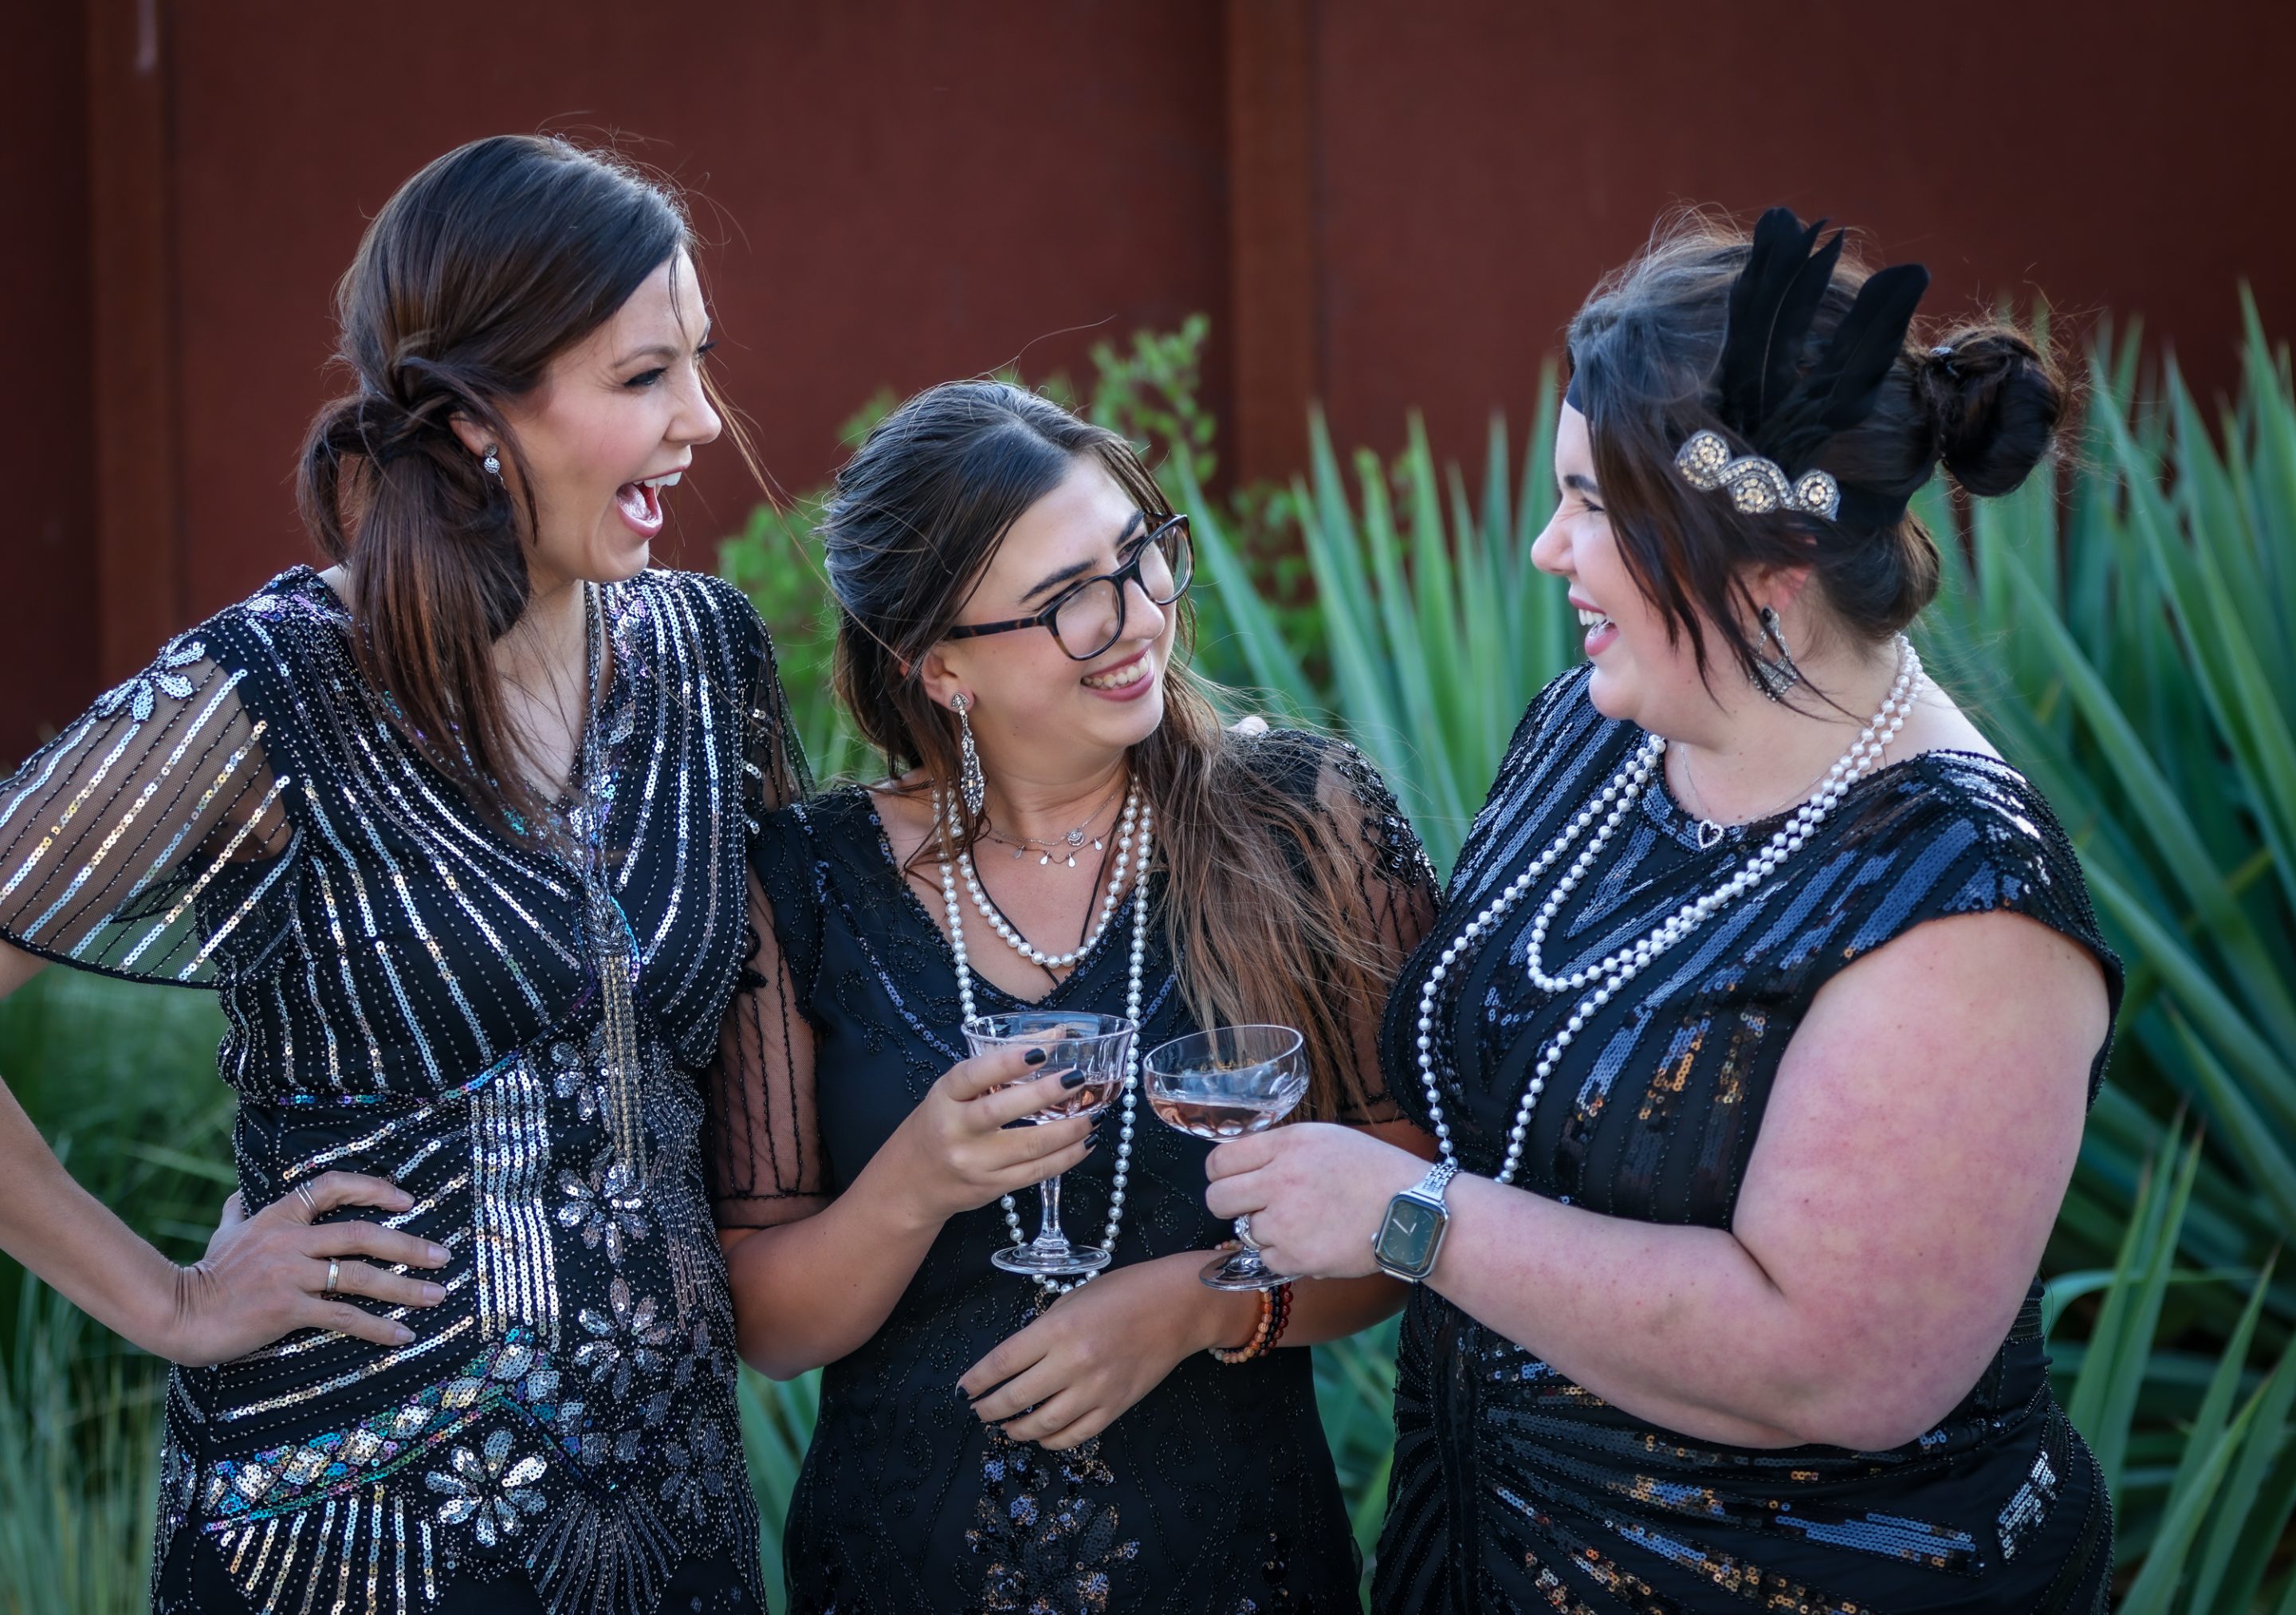 A group of women in black dresses are holding wine glasses at The LIME Foundation event in Santa Rosa.